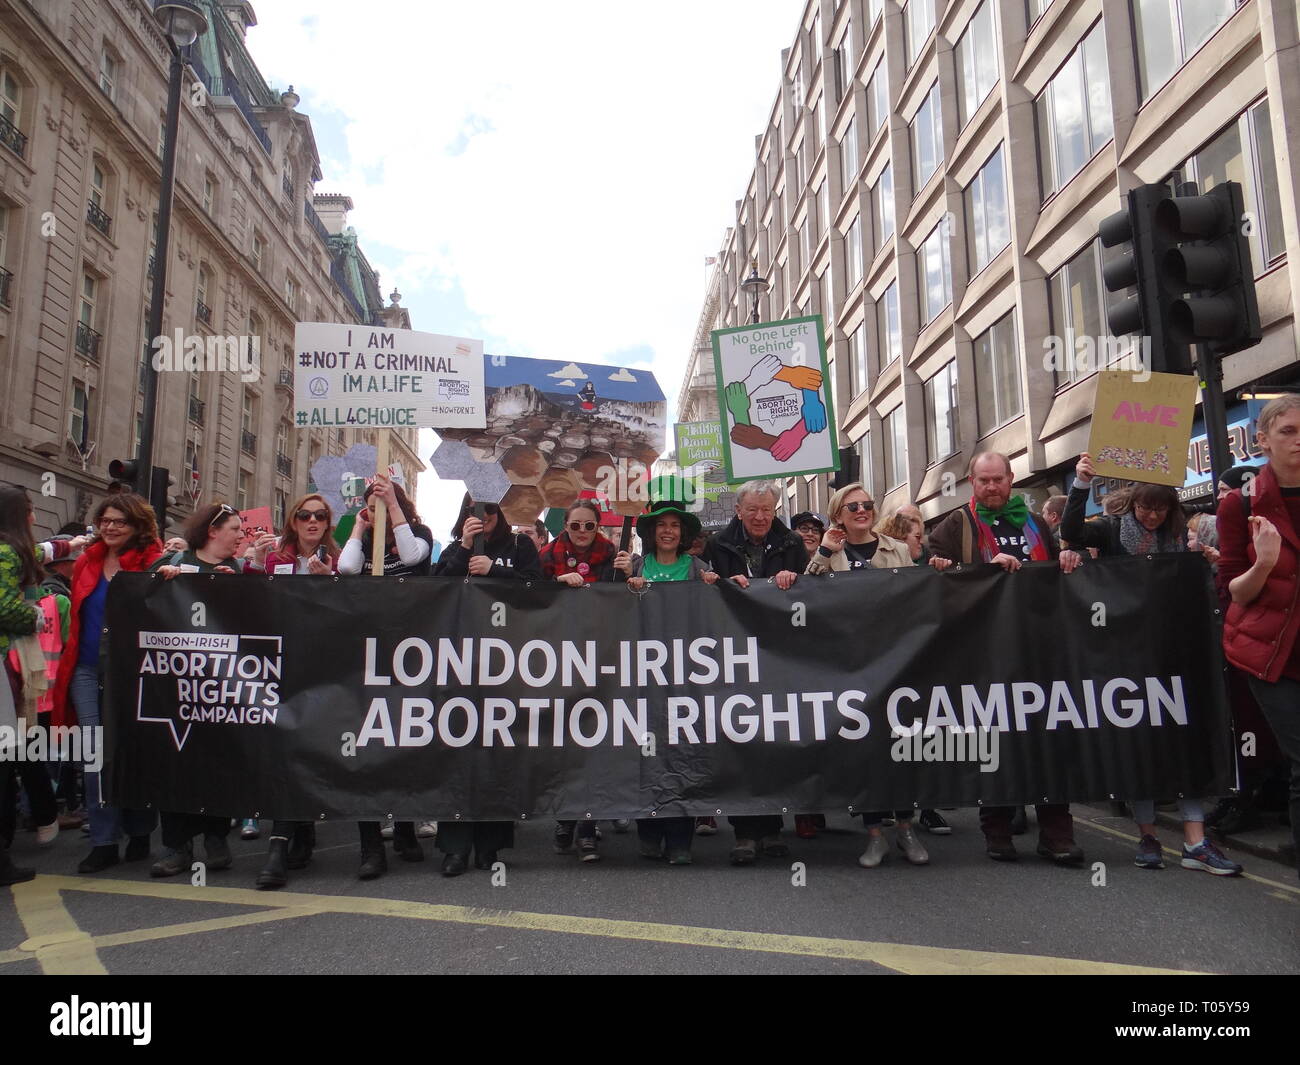 London, UK. 17th March 2019. London-Irish abortions rights campaign at St. Patrick's Parade in London, UK Credit: Nastia M/Alamy Live News Stock Photo